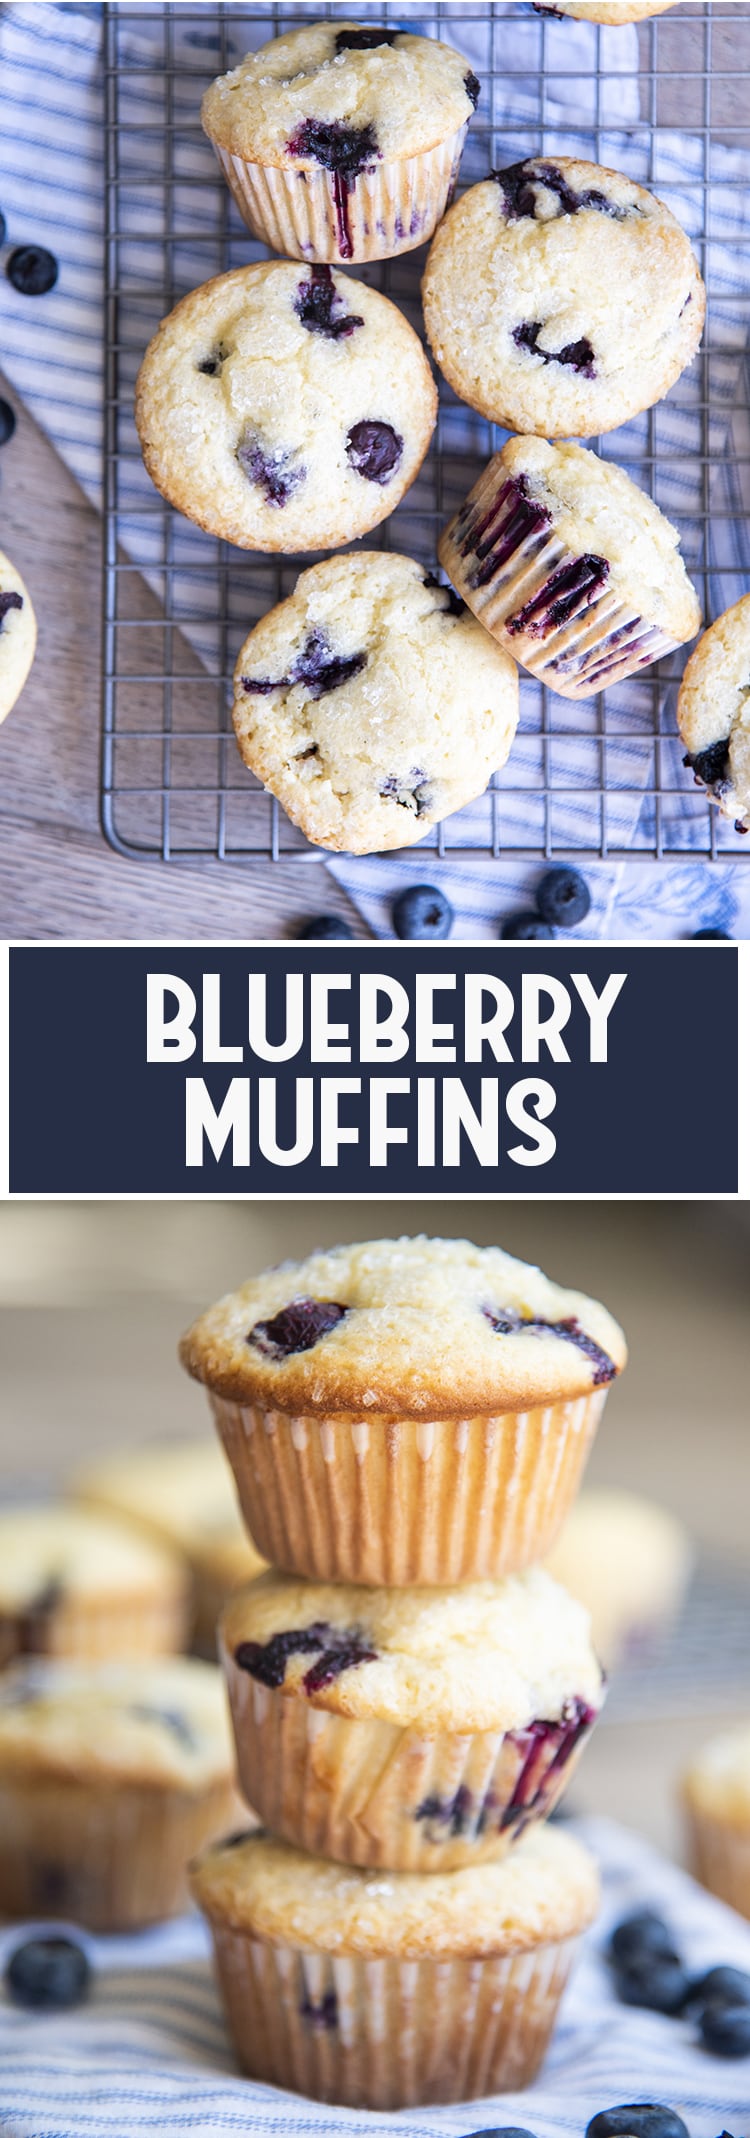 2 image collage of blueberry muffins with one close up shot of a muffin and title card that reads blueberry muffins.